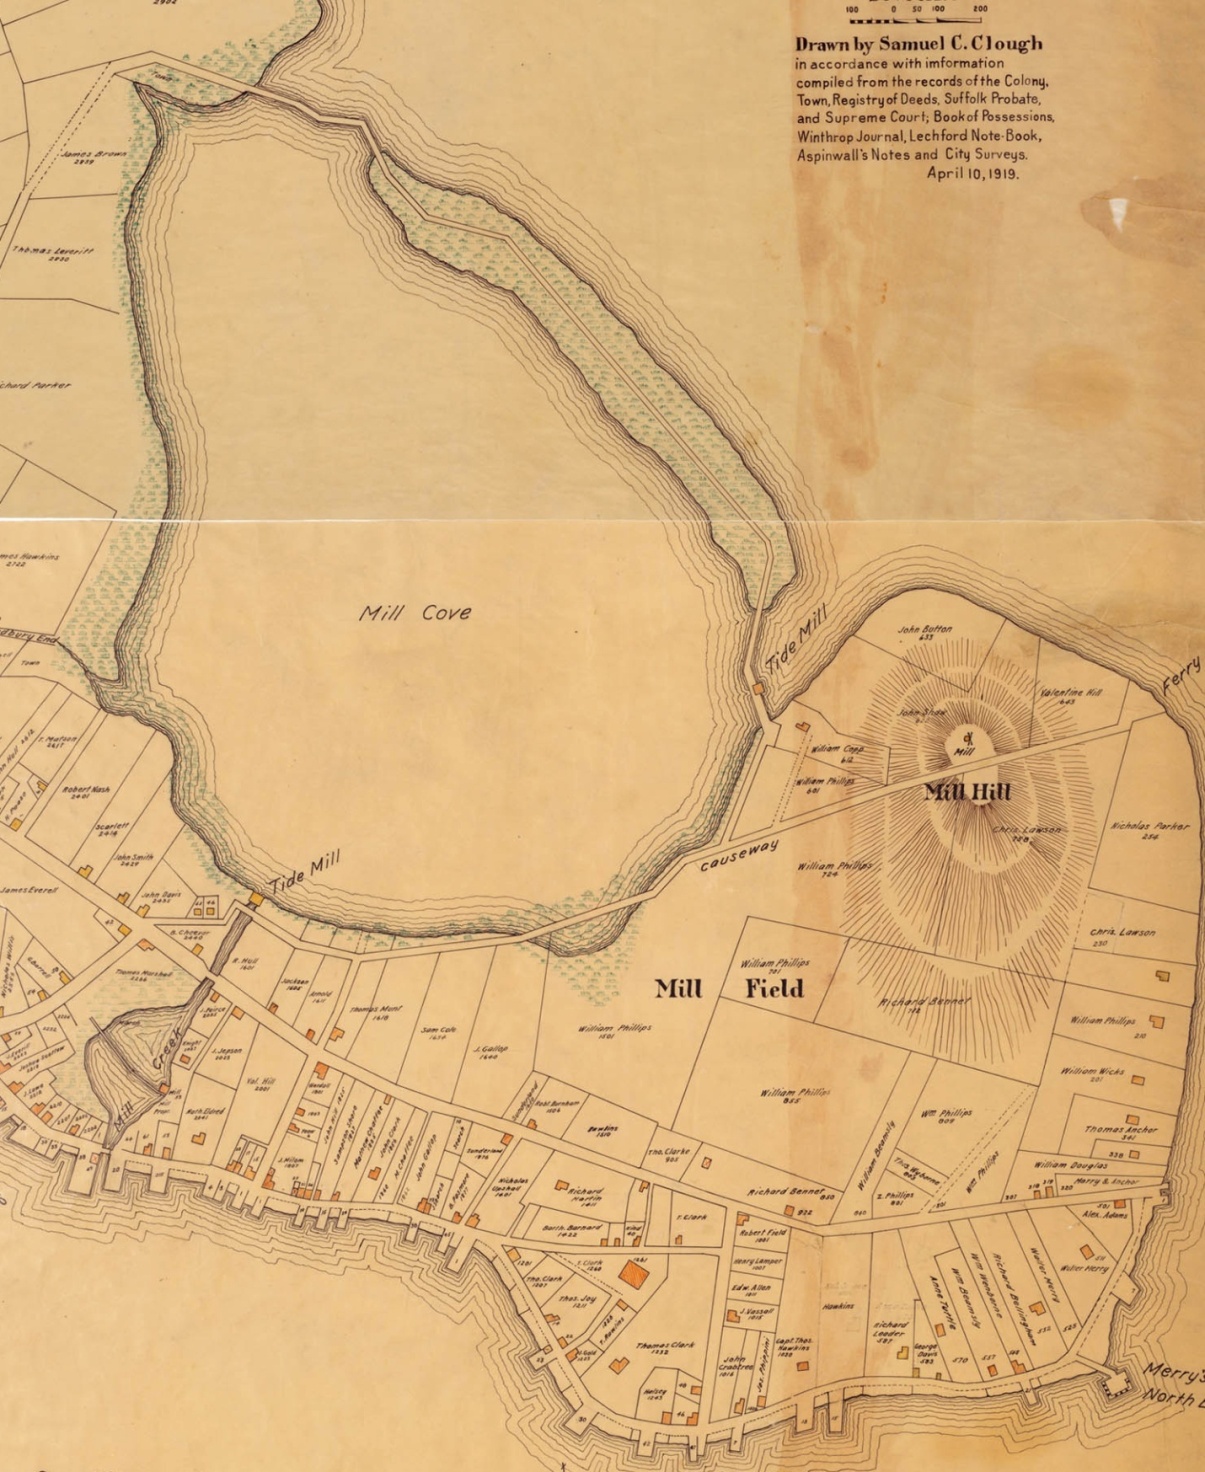 Boston 1648 - Clough, Chester. Map of the Town of Boston 1648. Drawn by Samuel C. Clough, in Accordance with Information Compiled from the Records of the Colony. (1919).- from the Massachusetts Historical Society.